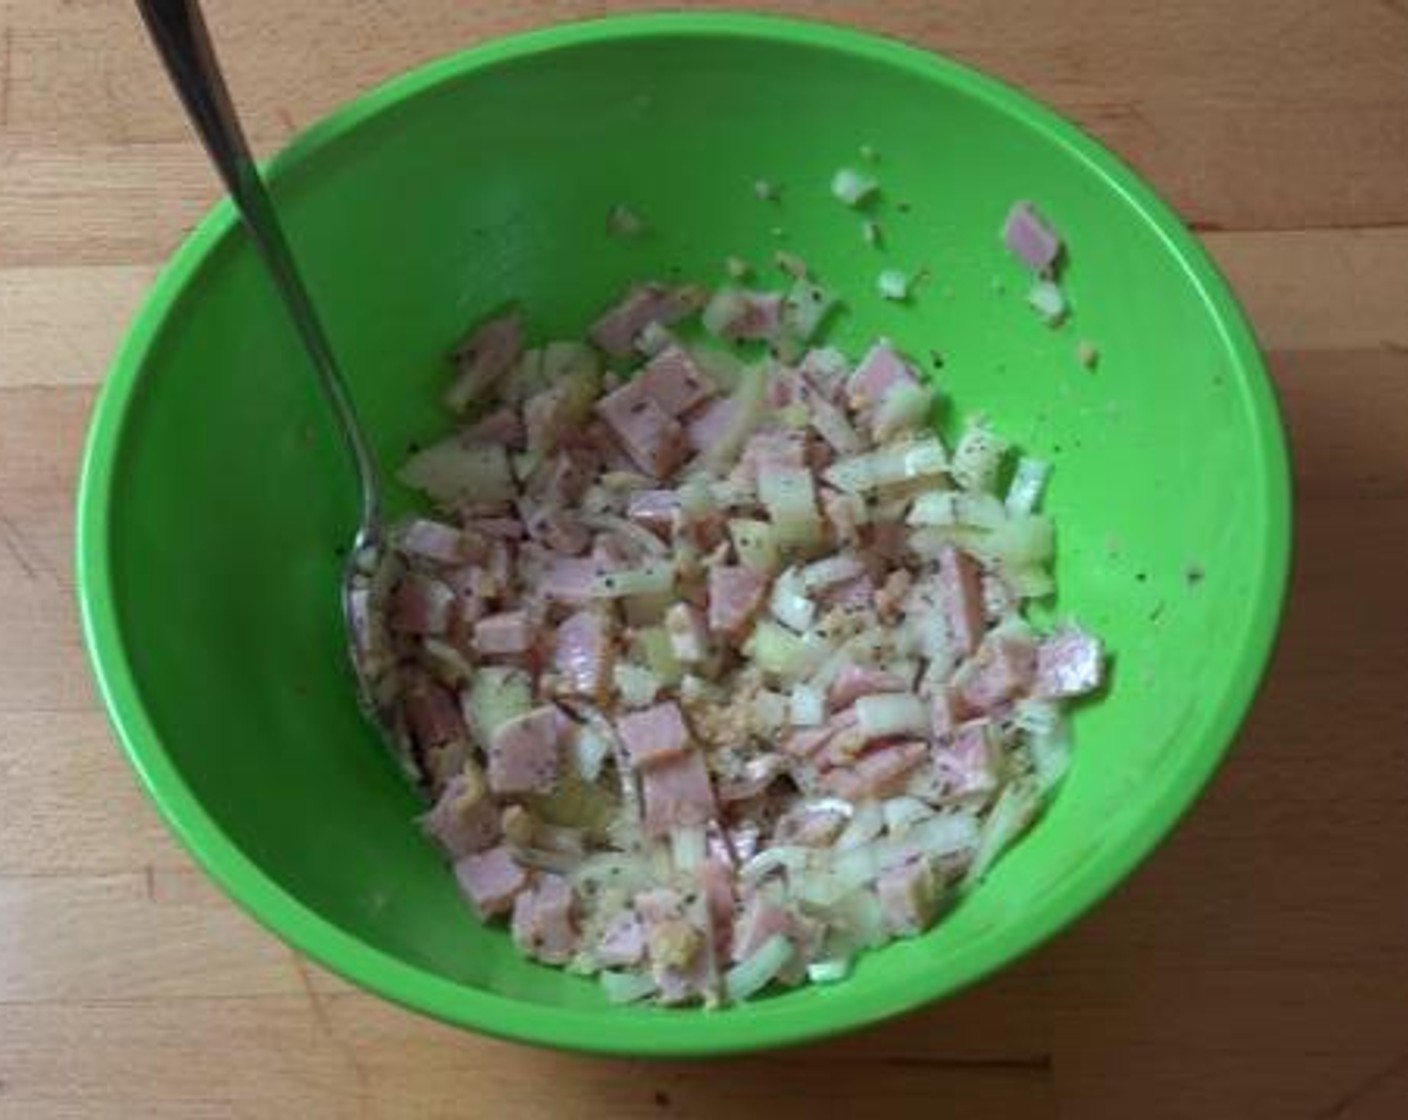 step 1 Into a mixing bowl, add the Yellow Onion (1), crushed Garlic (2 cloves), Dried Mixed Herbs (1 Tbsp), Short Cut Rindless Bacon Slices (4), Olive Oil (2 Tbsp), Salt (to taste), and Ground Black Pepper (to taste). Give that a good mix together.